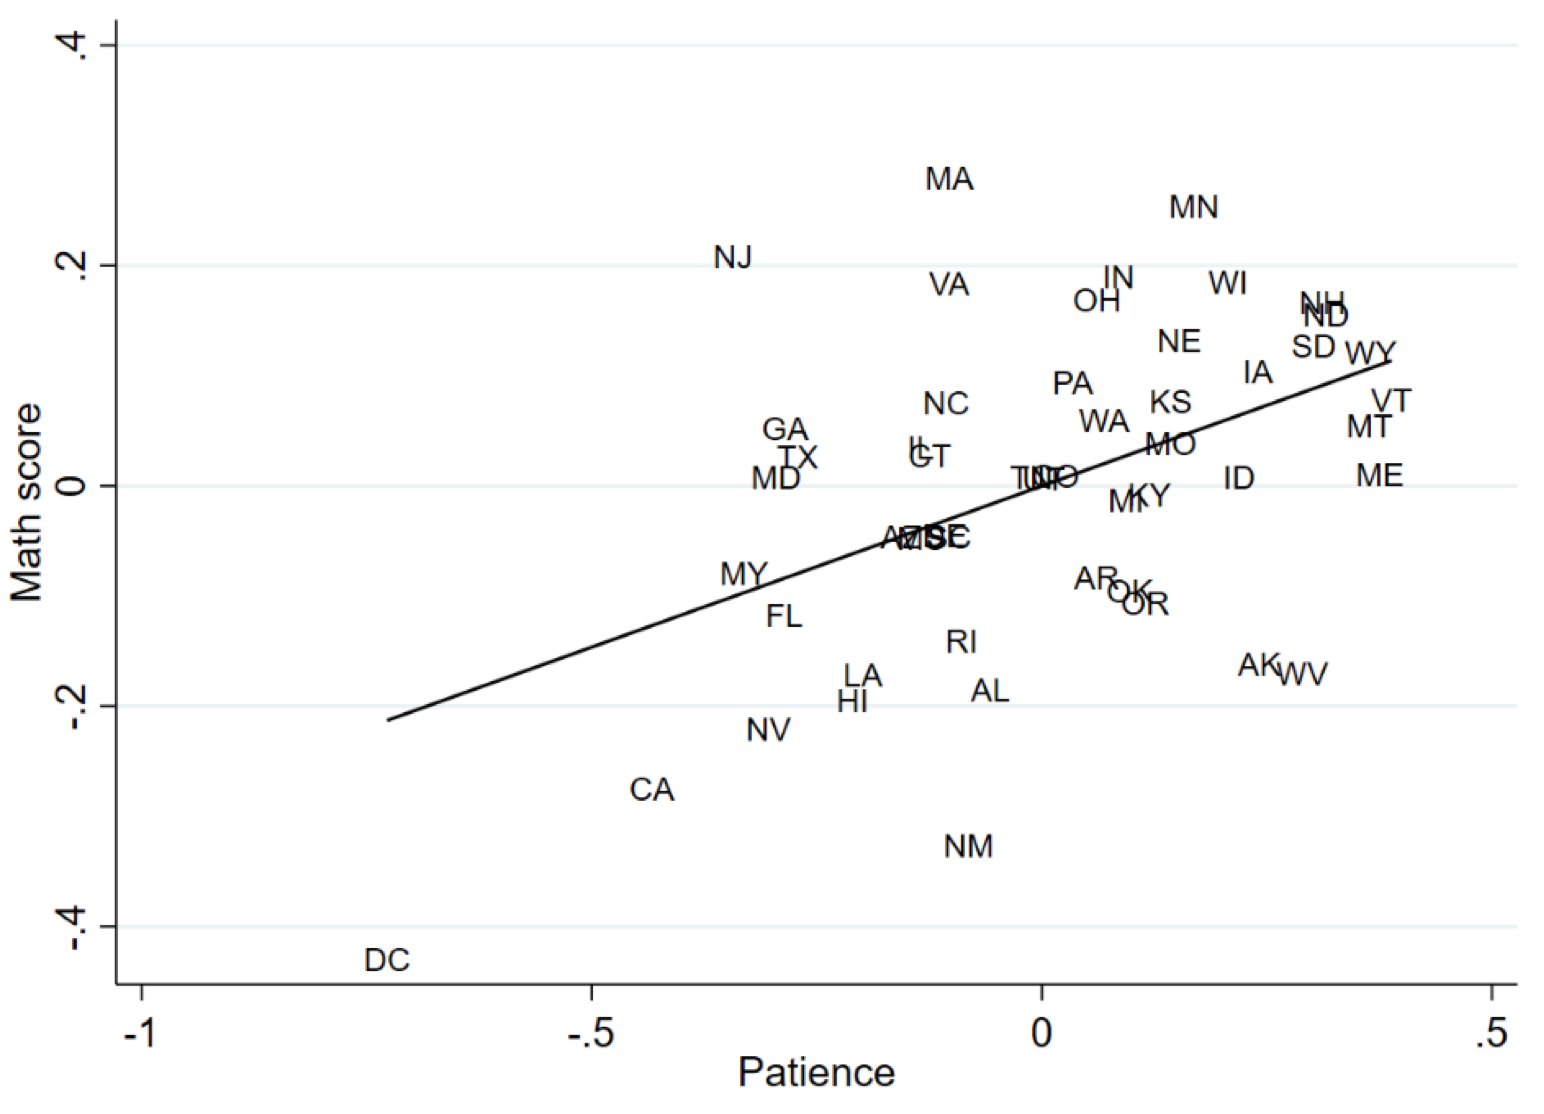 Figure 4 Patience and student achievement across US states